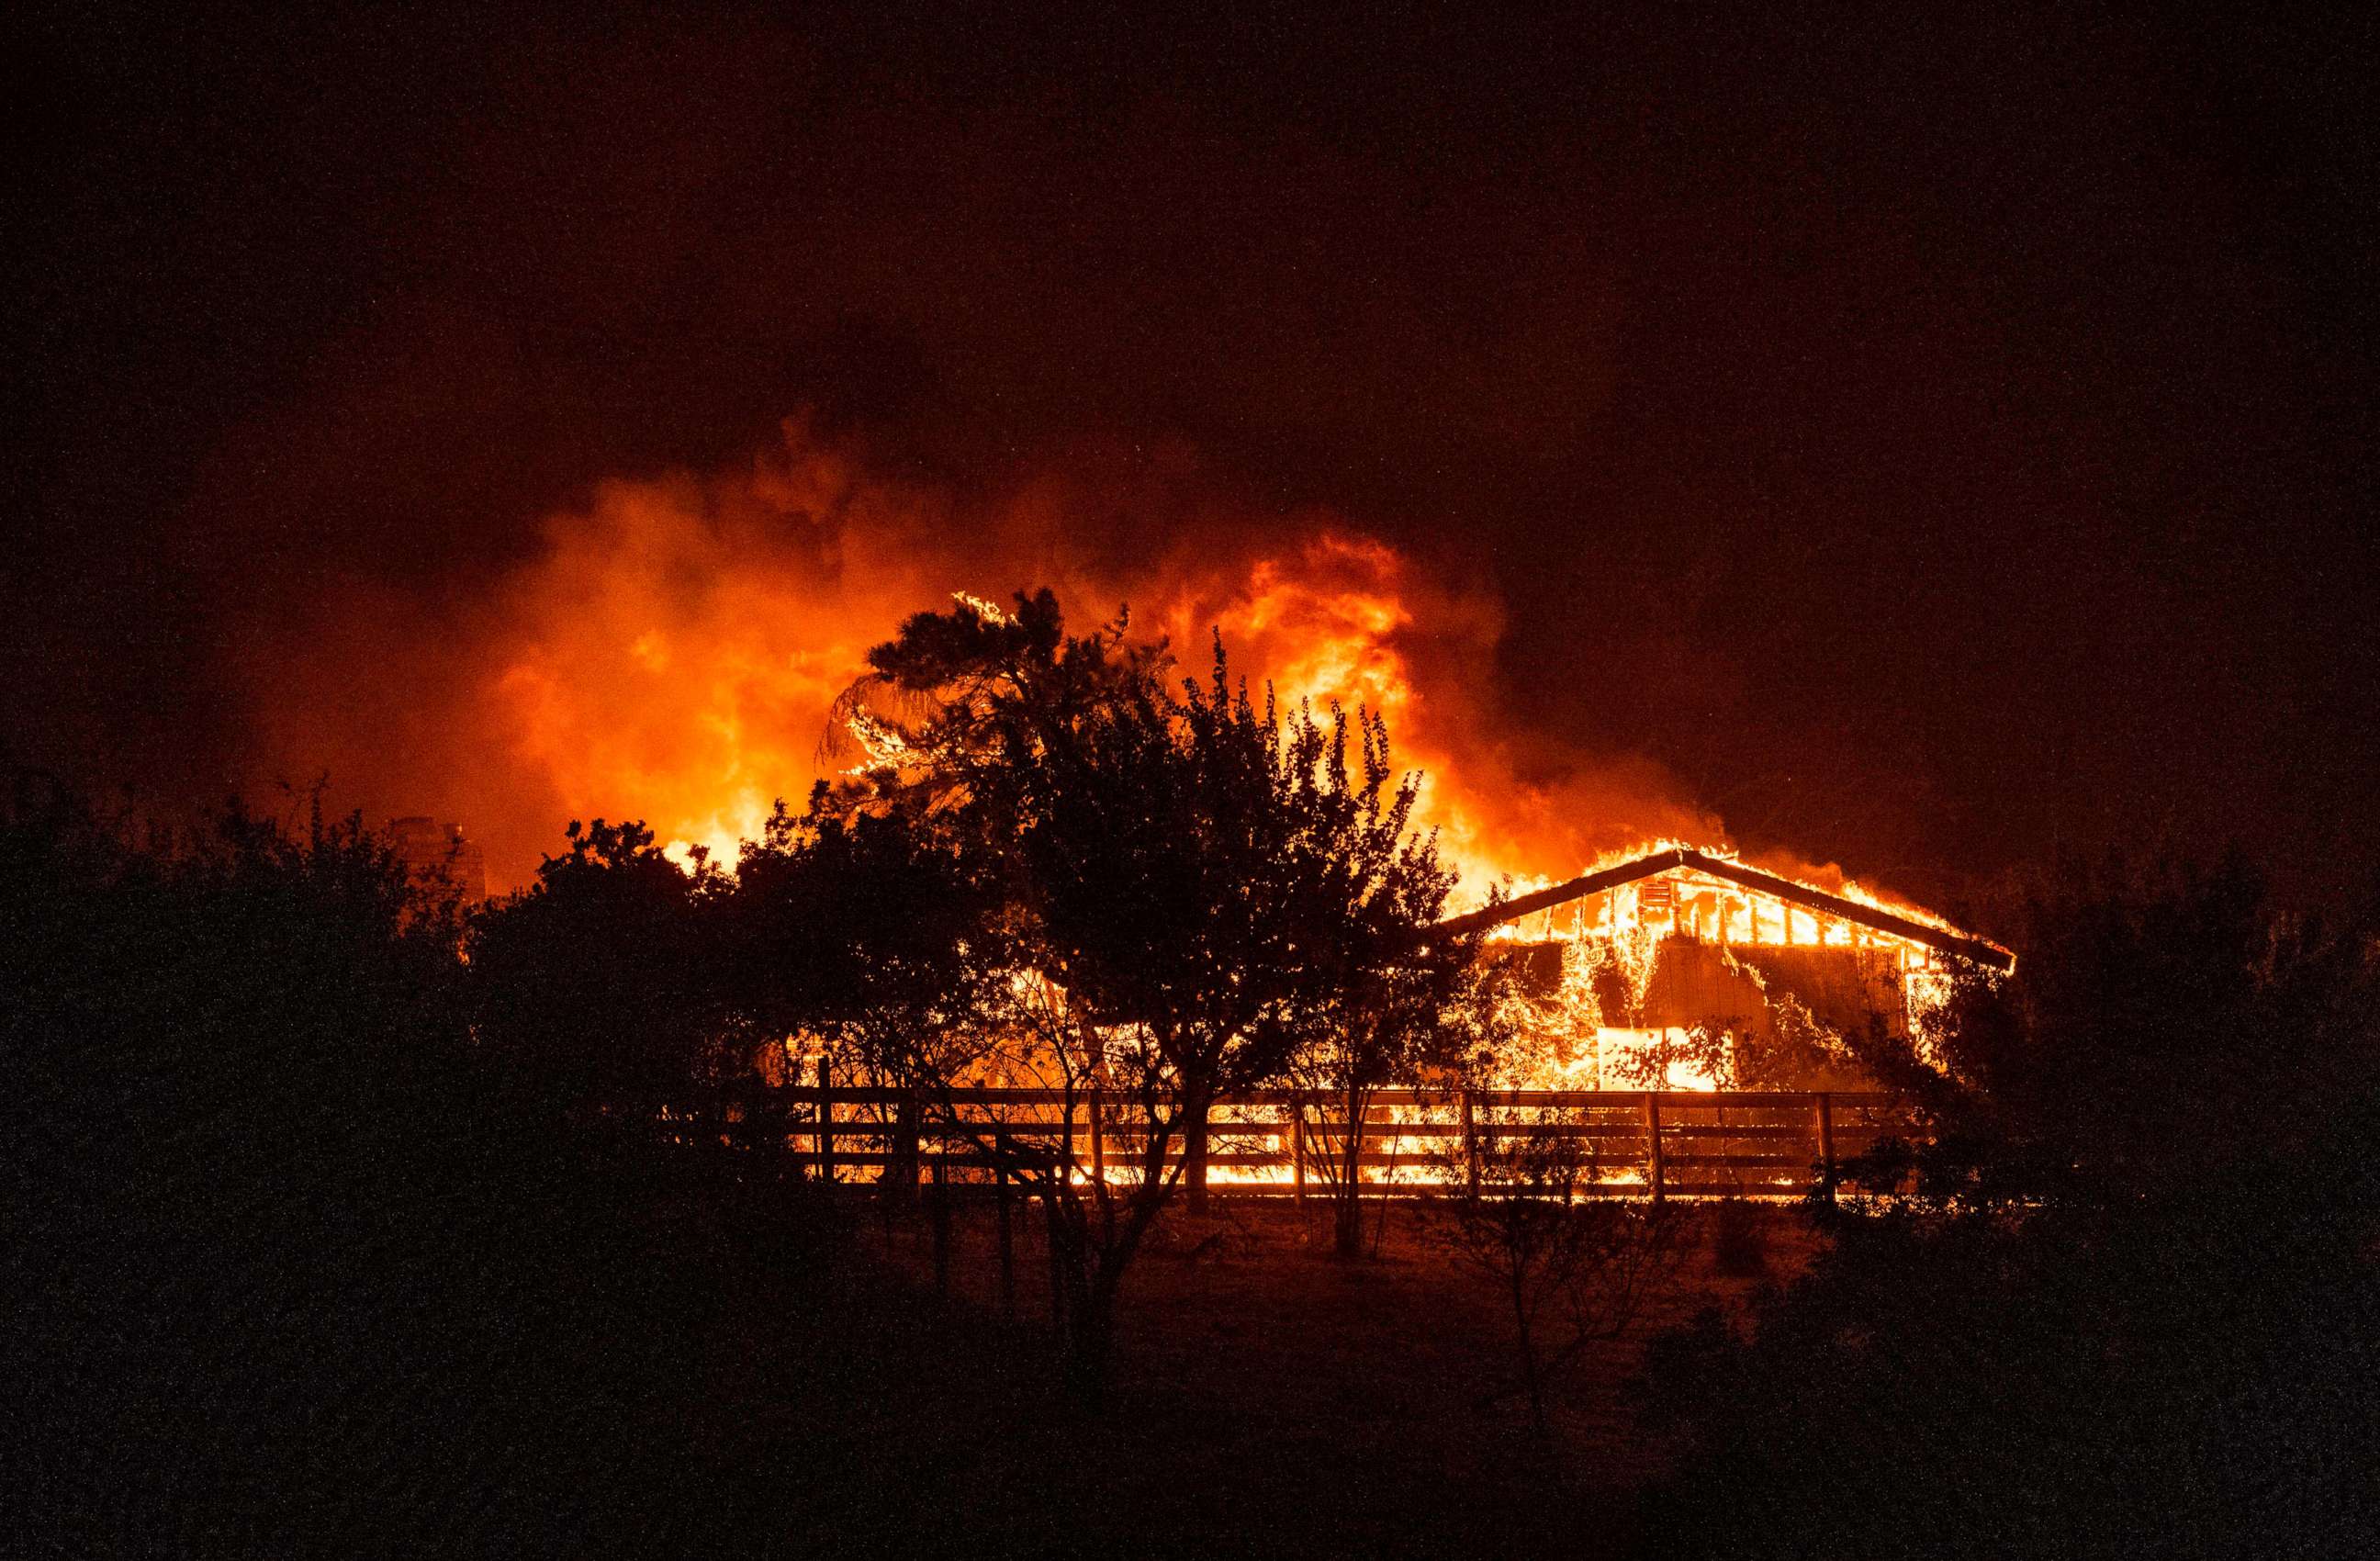 PHOTO: A home burns in Vacaville, California during the LNU Lightning Complex fire, Aug. 19, 2020.